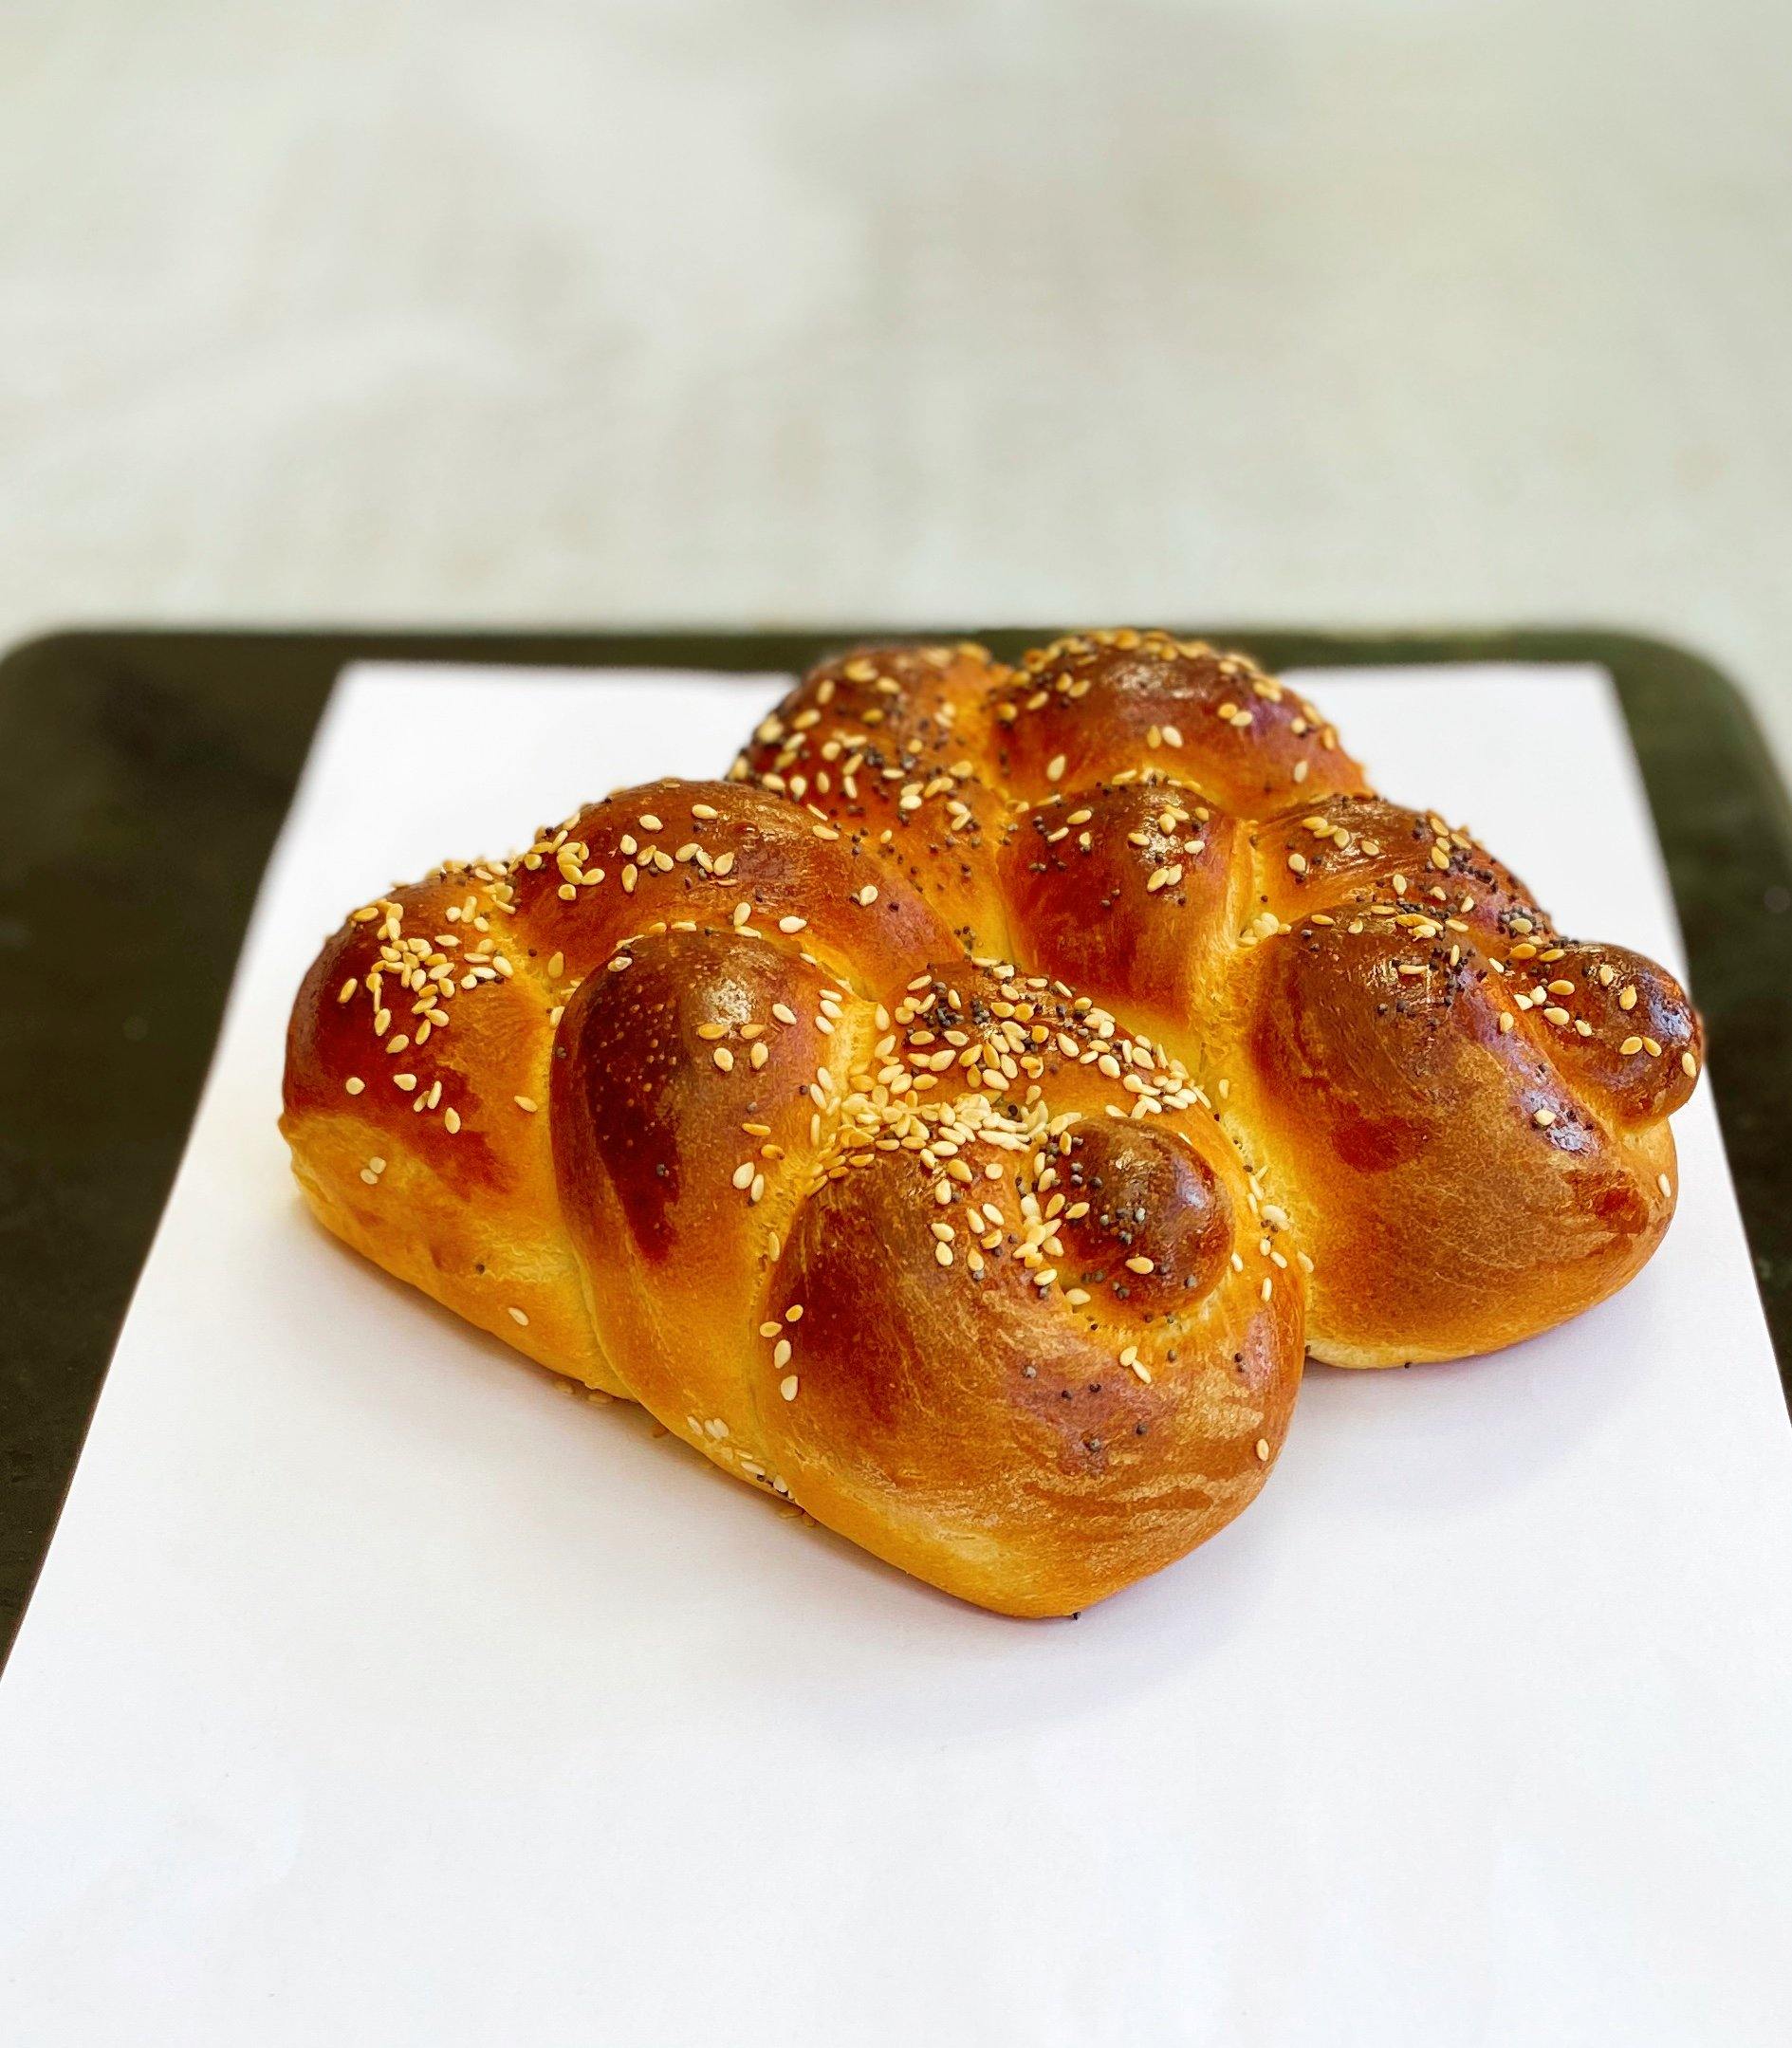 Image of two gorgeous mini Challah breads - Yasmin Bakery & Cartering